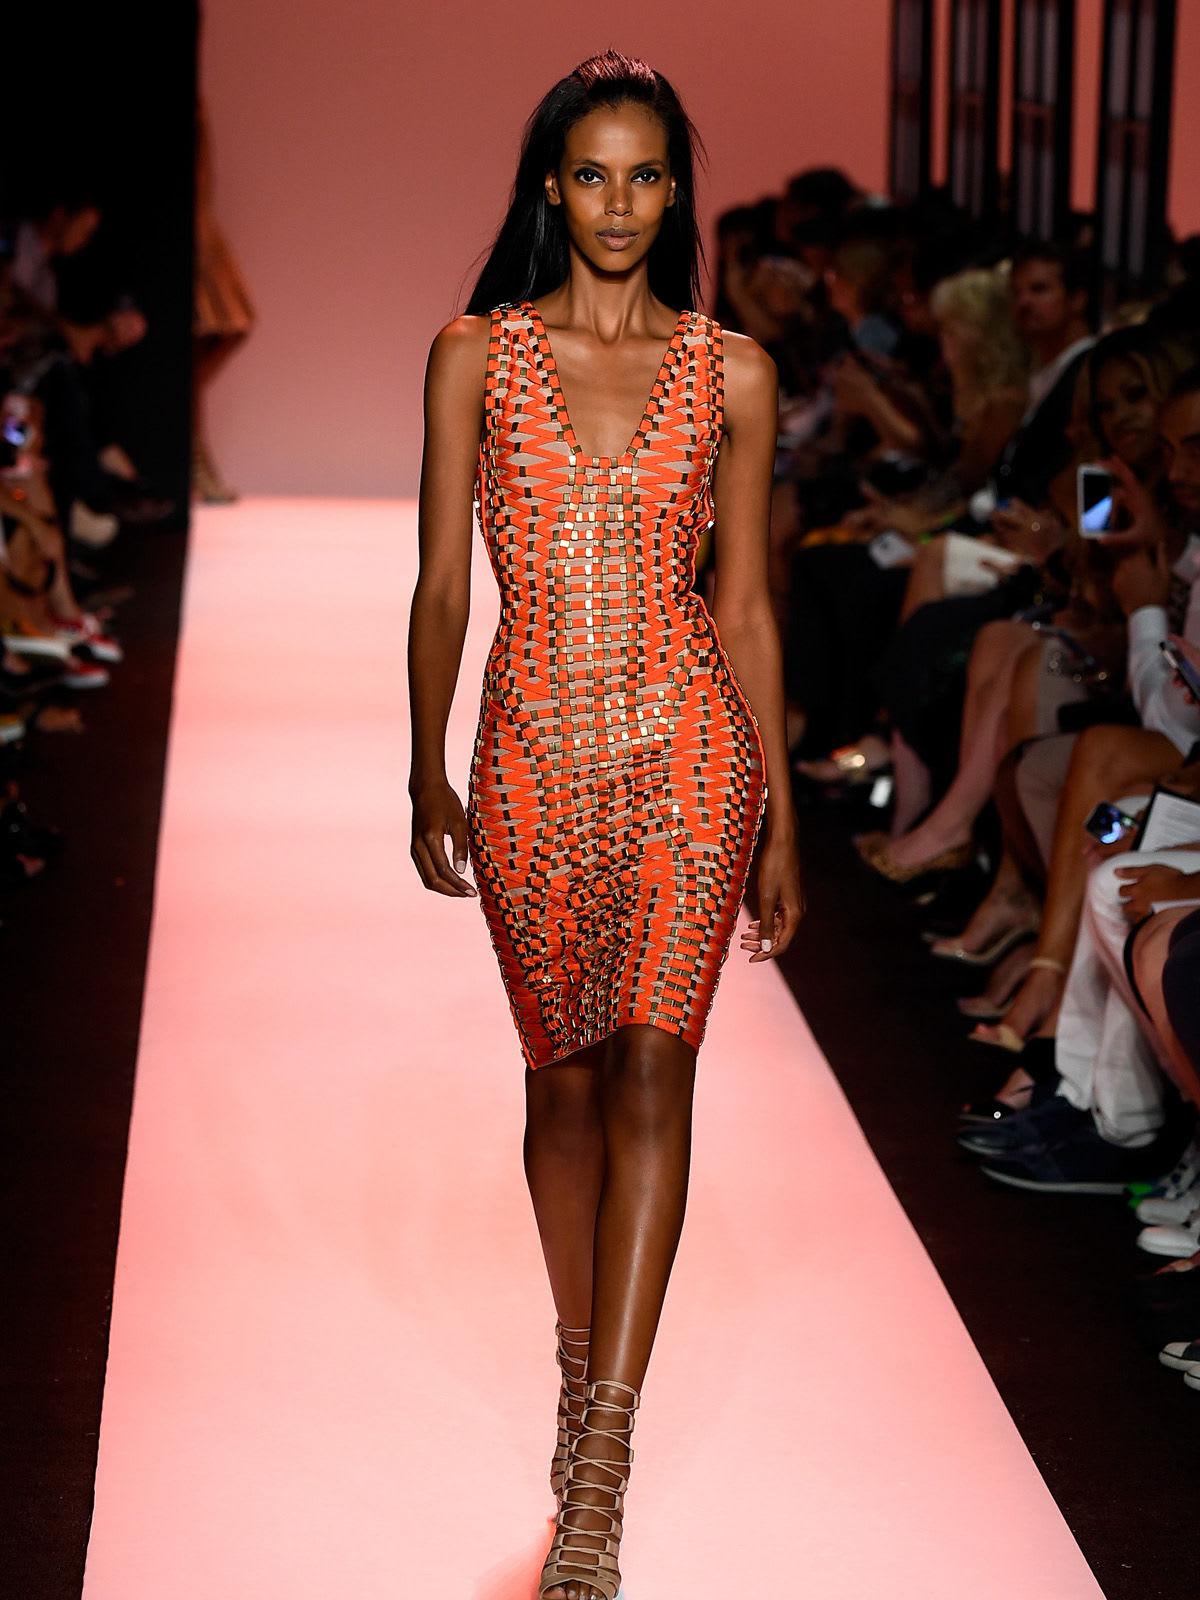 5 Sexy Herve Leger Dresses That'll Drive The Boys Wild